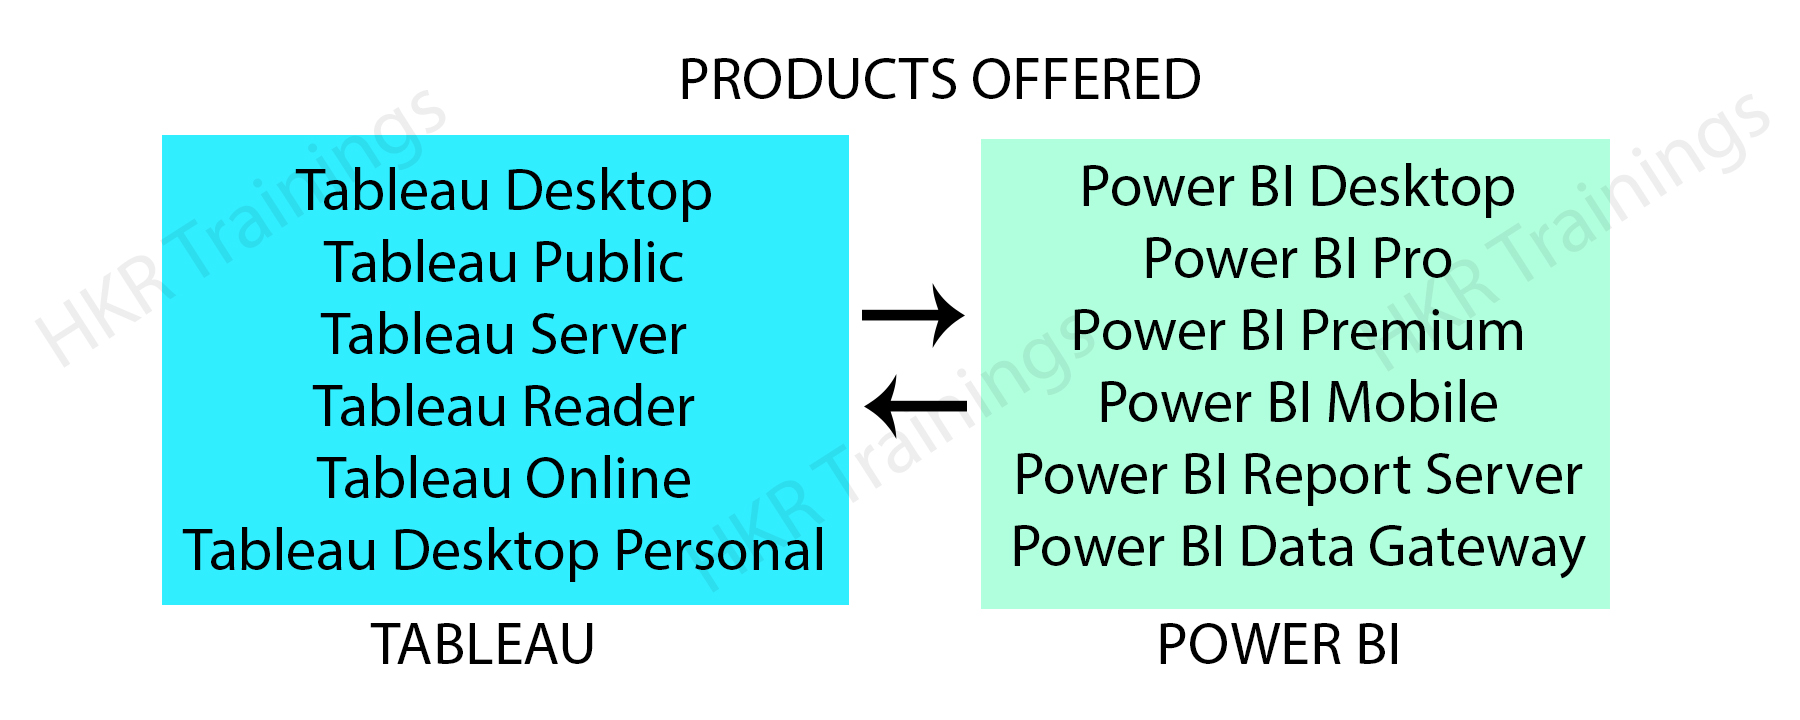 Products offered